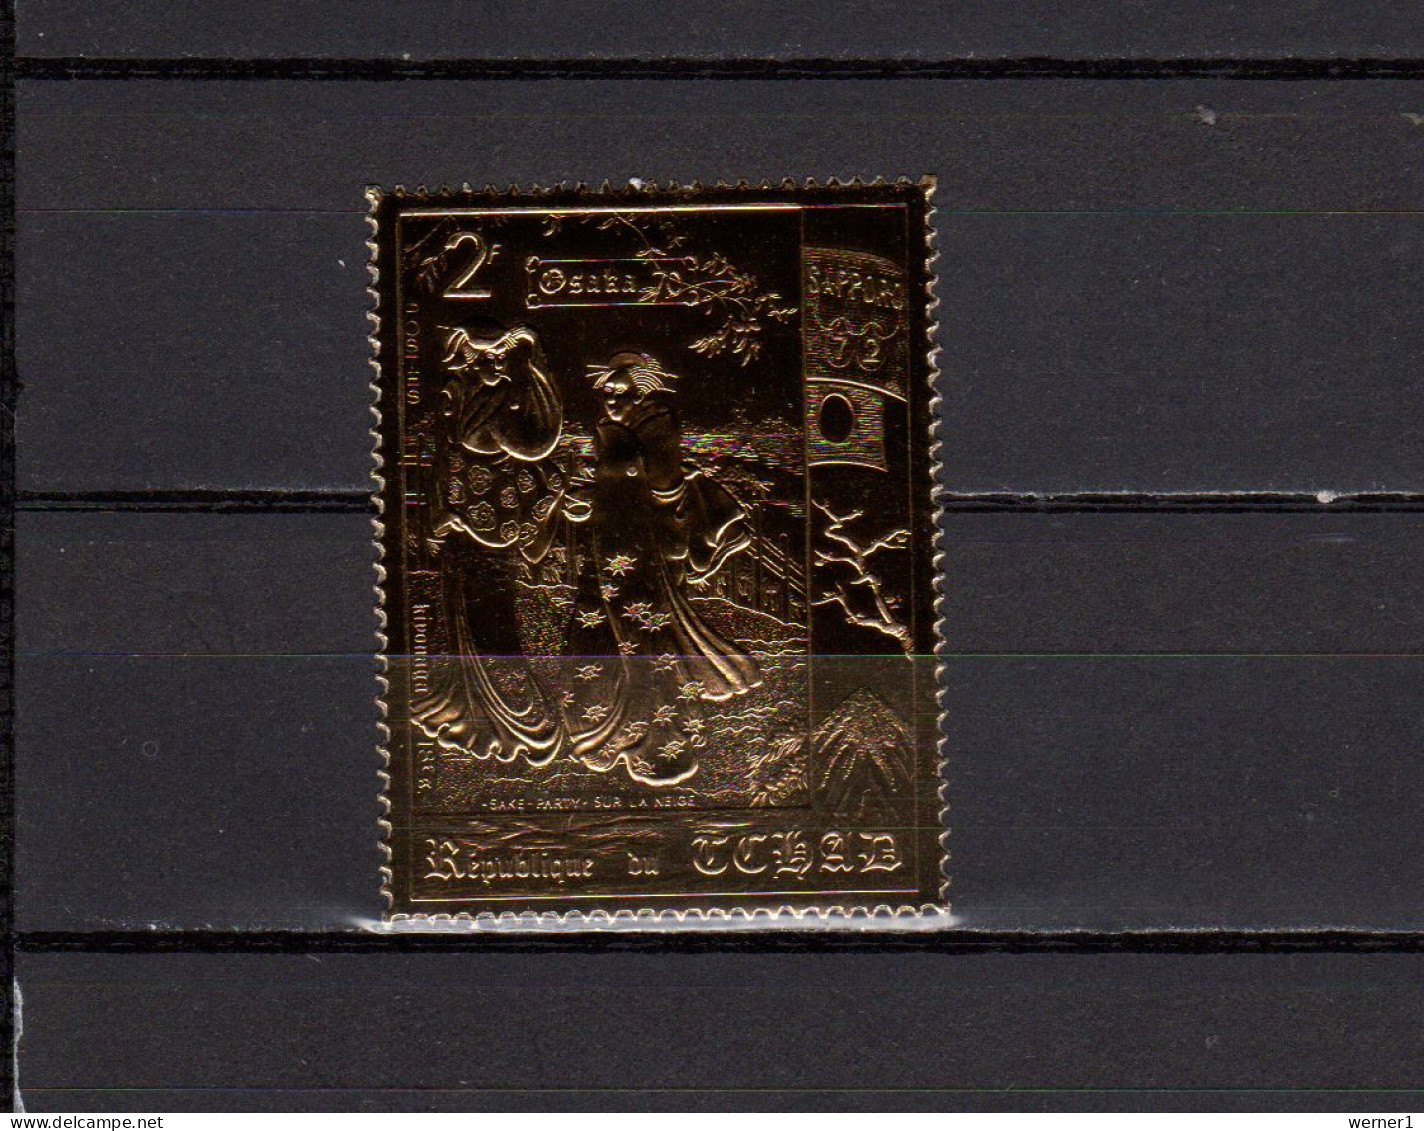 Chad - Tchad 1971 Olympic Games Sapporo Gold Stamp MNH - Winter 1972: Sapporo